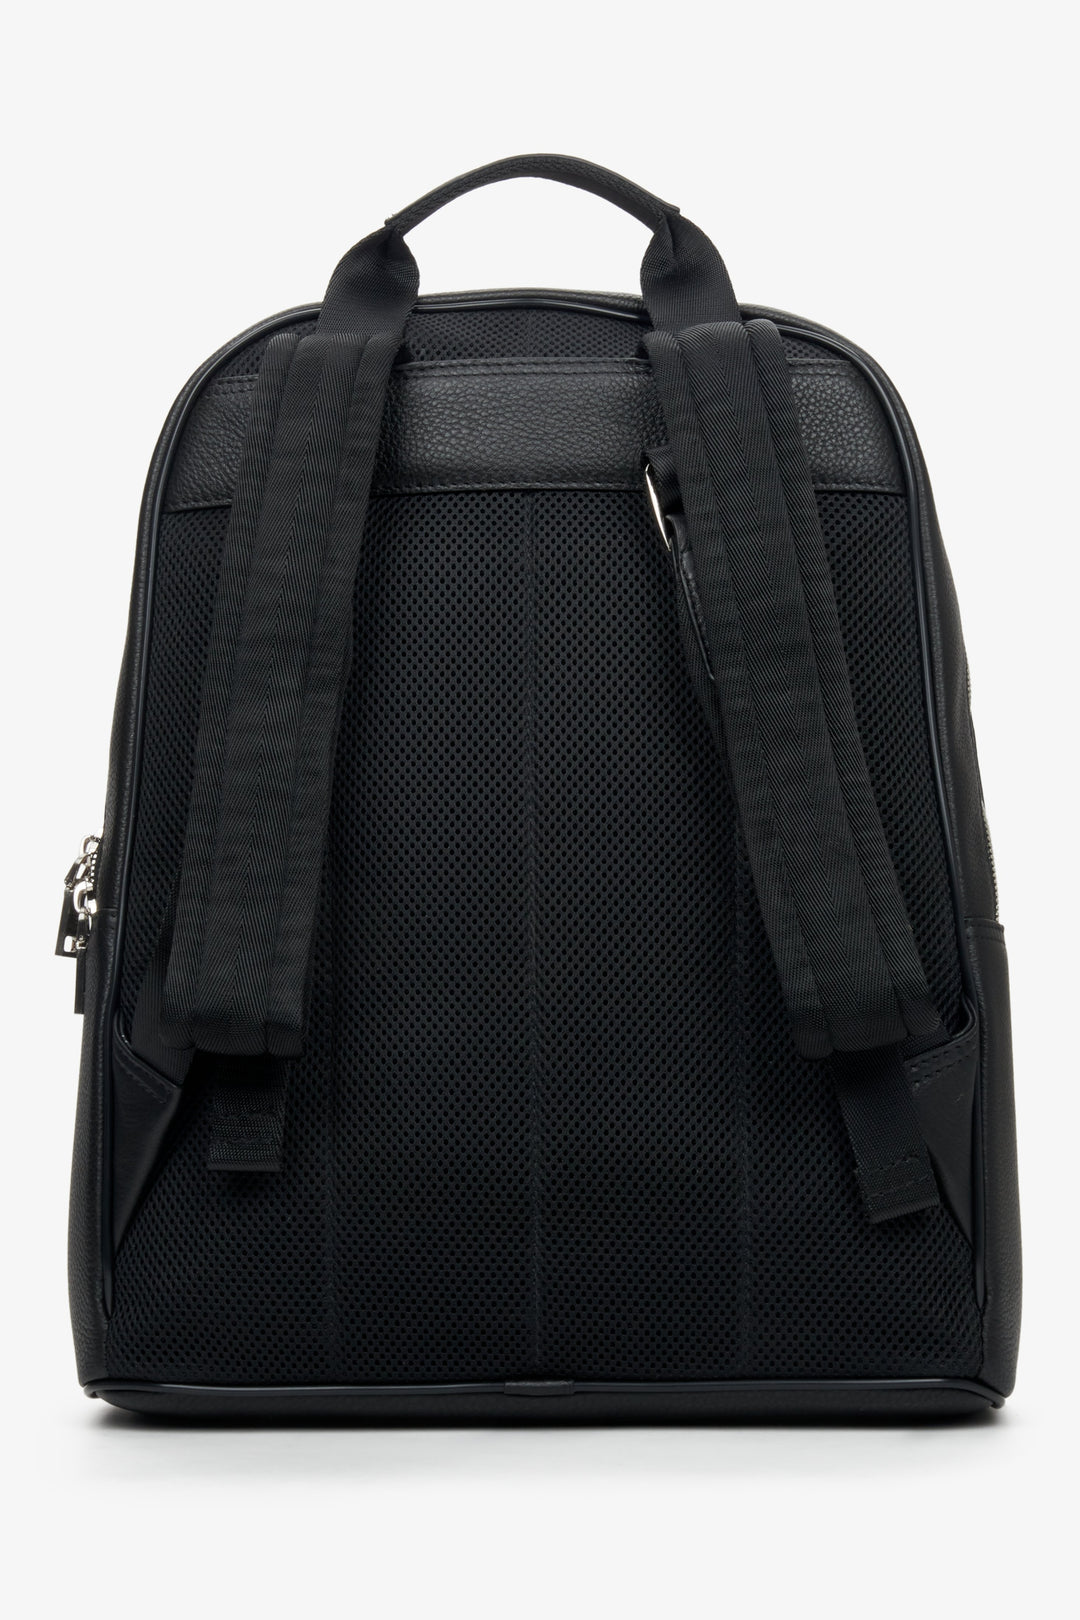 Men's black backpack with adjustable straps by Estro - back view.